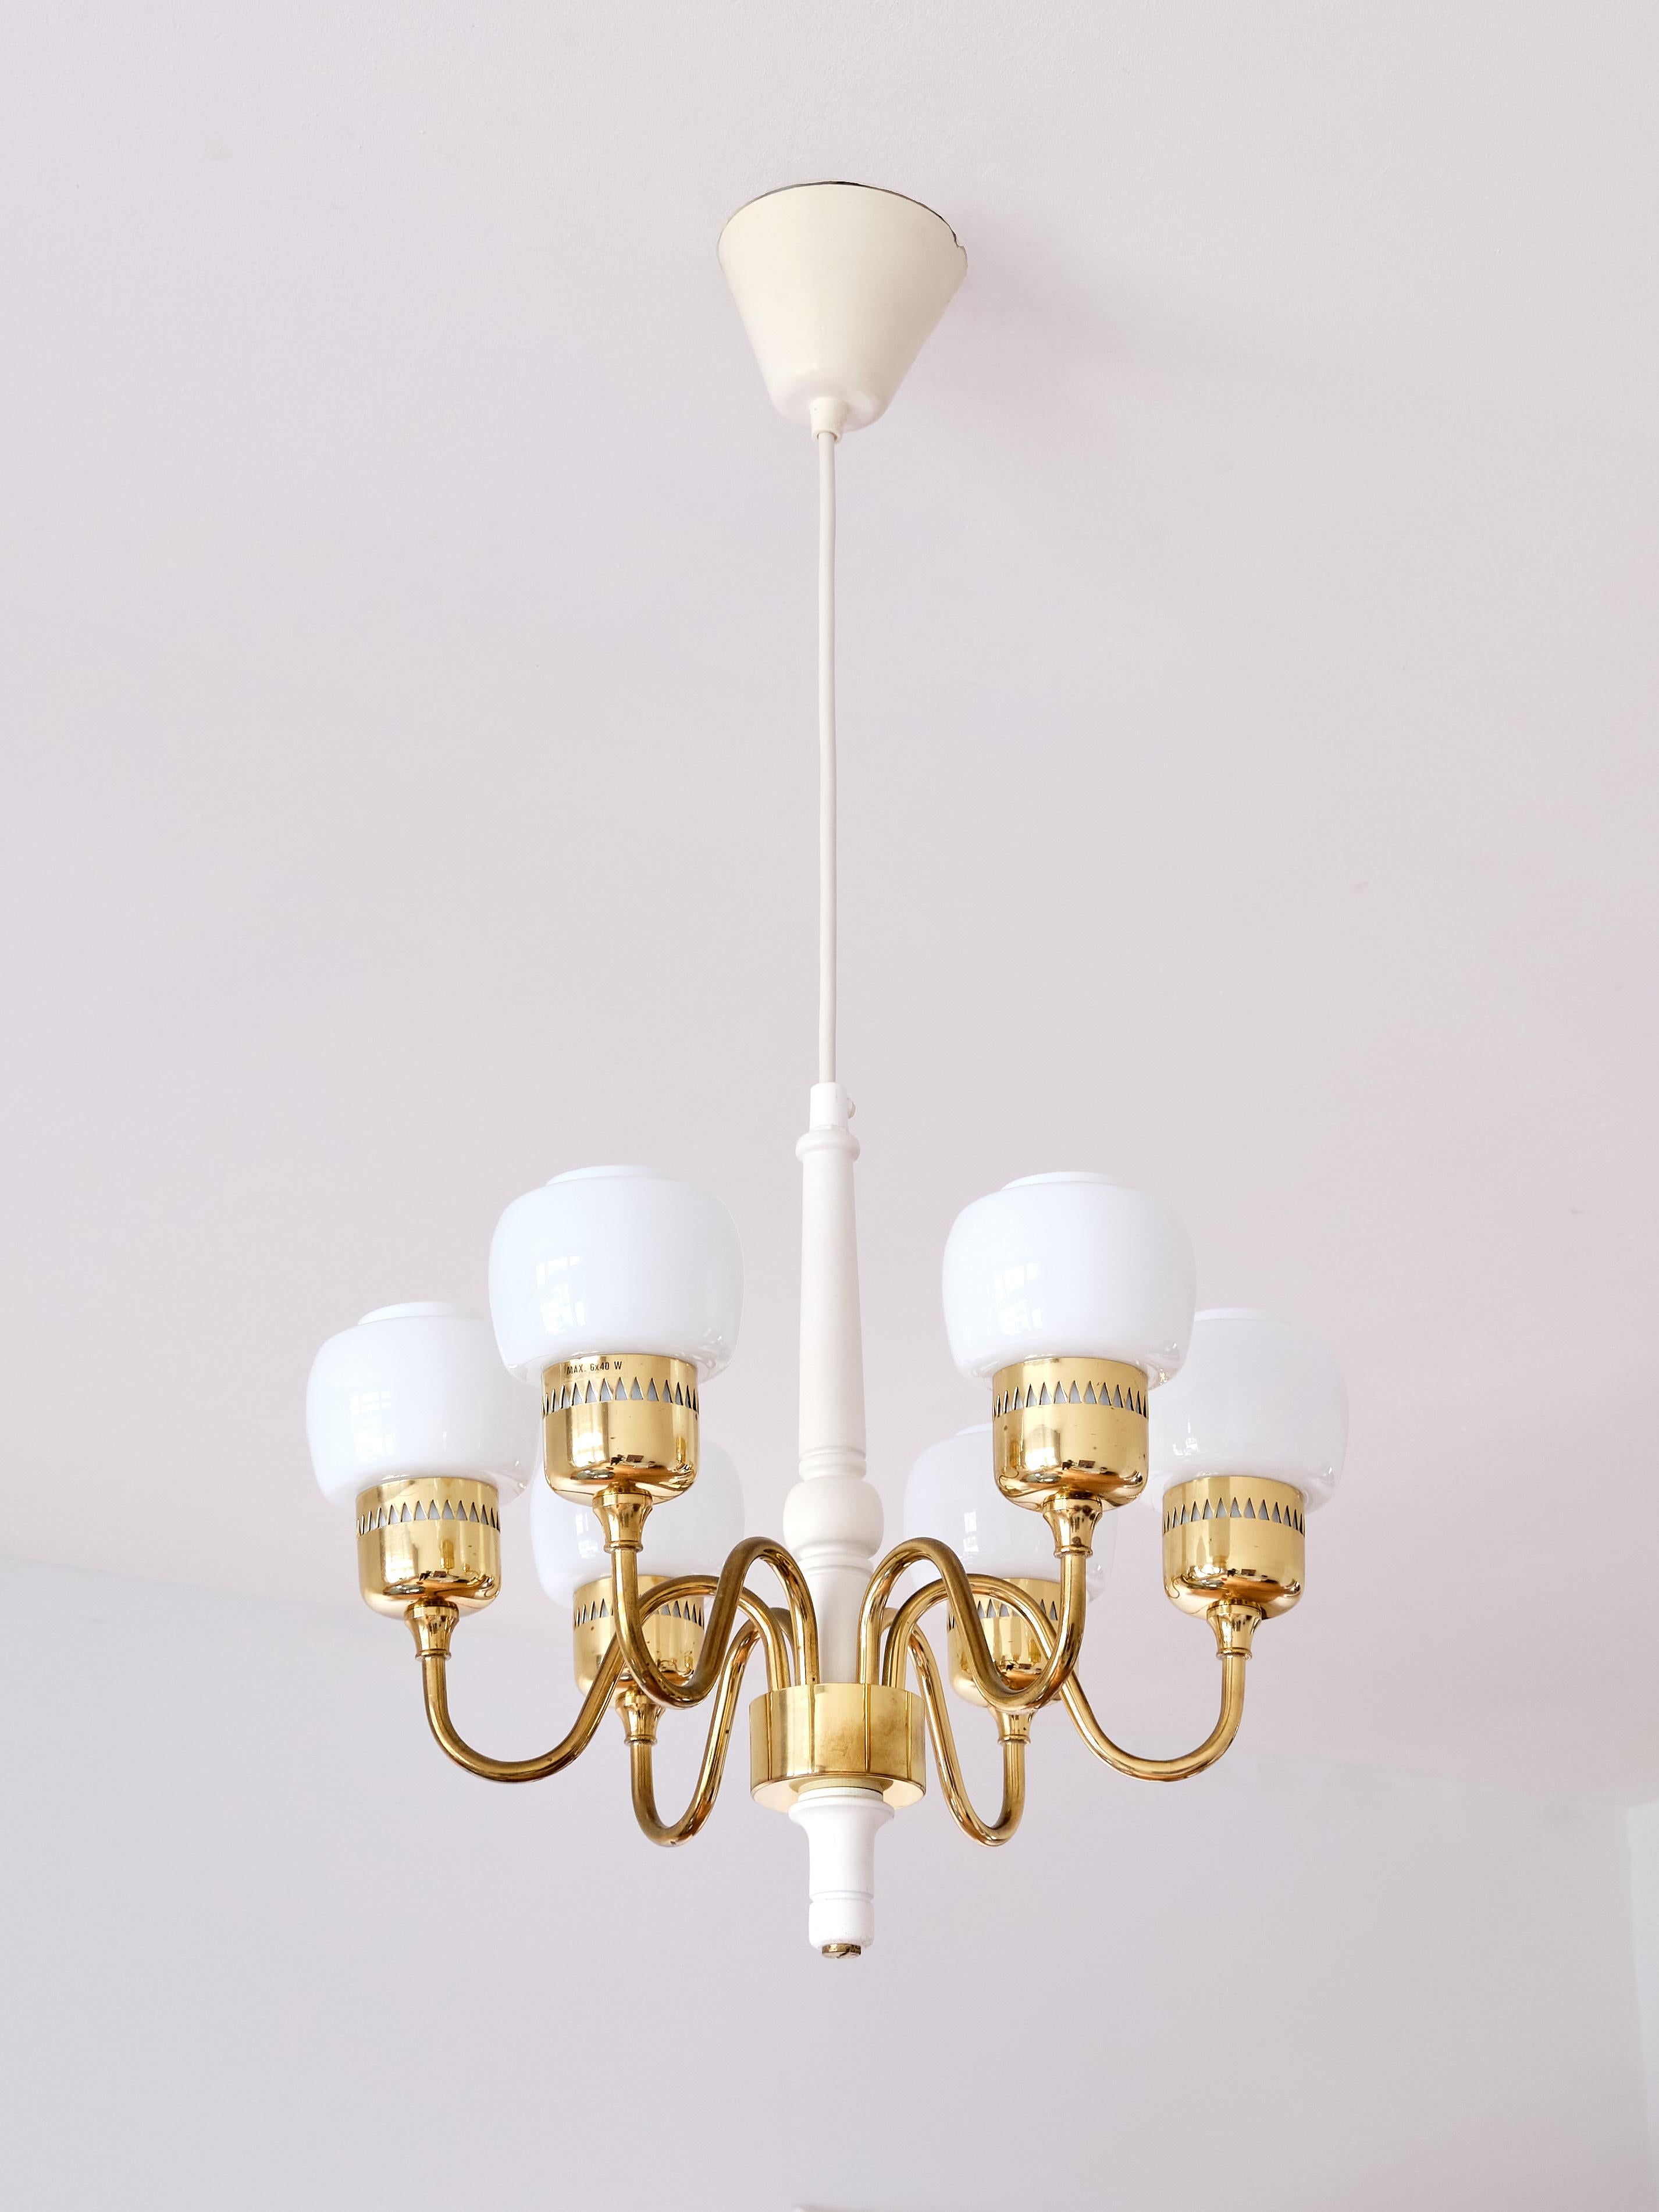 Hans-Agne Jakobsson Six Arm T526 Chandelier, Brass and Opal Glass, Sweden, 1960s For Sale 2